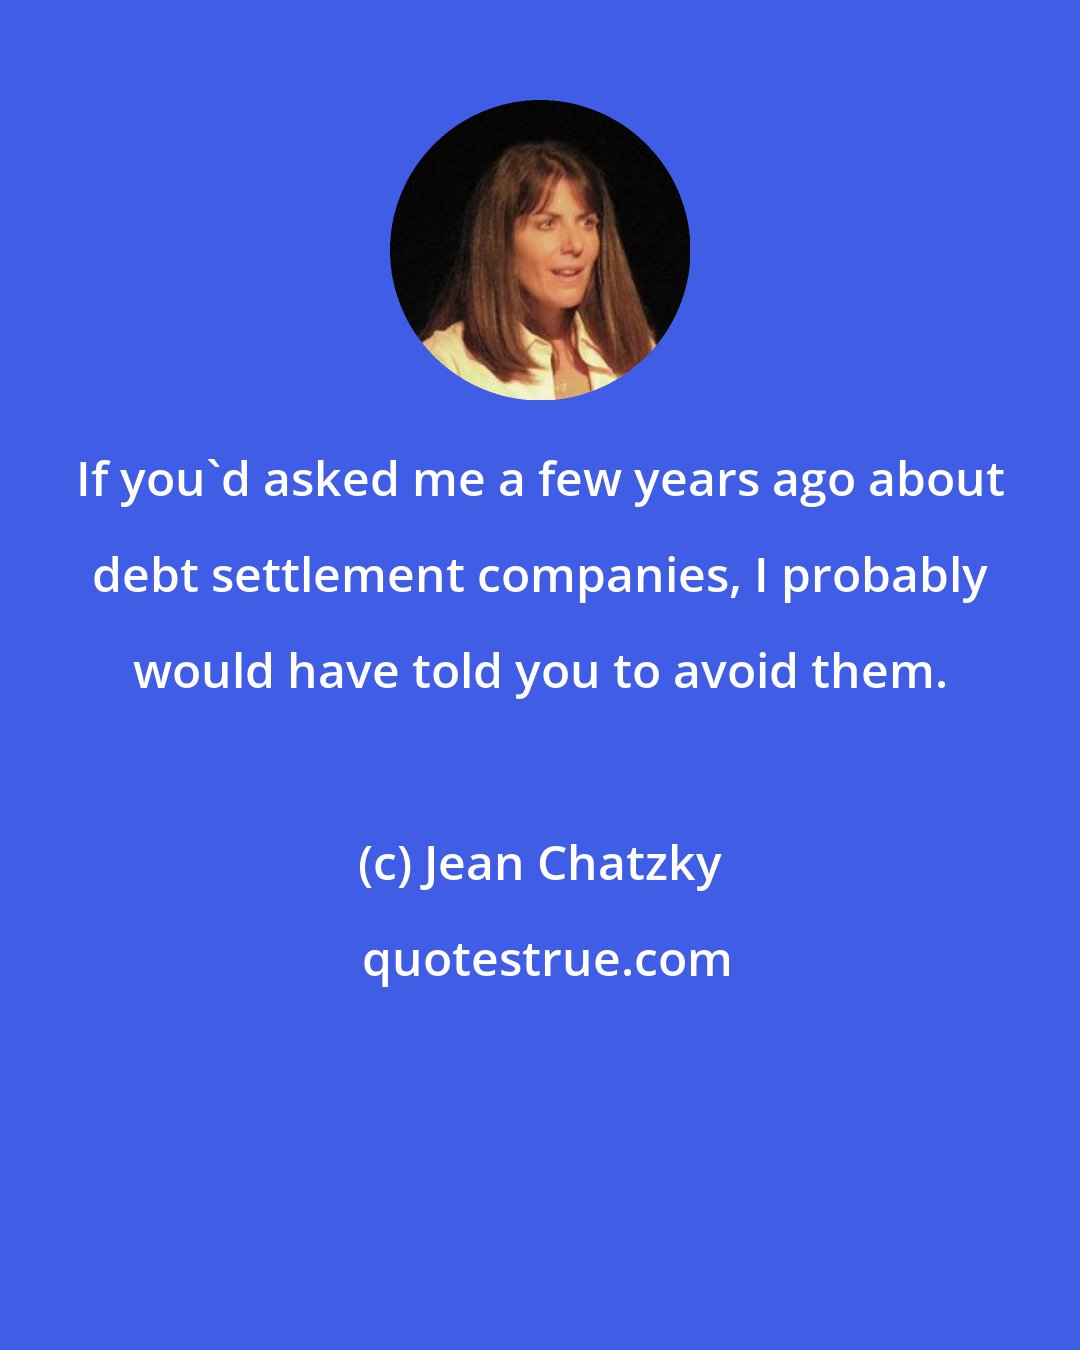 Jean Chatzky: If you'd asked me a few years ago about debt settlement companies, I probably would have told you to avoid them.